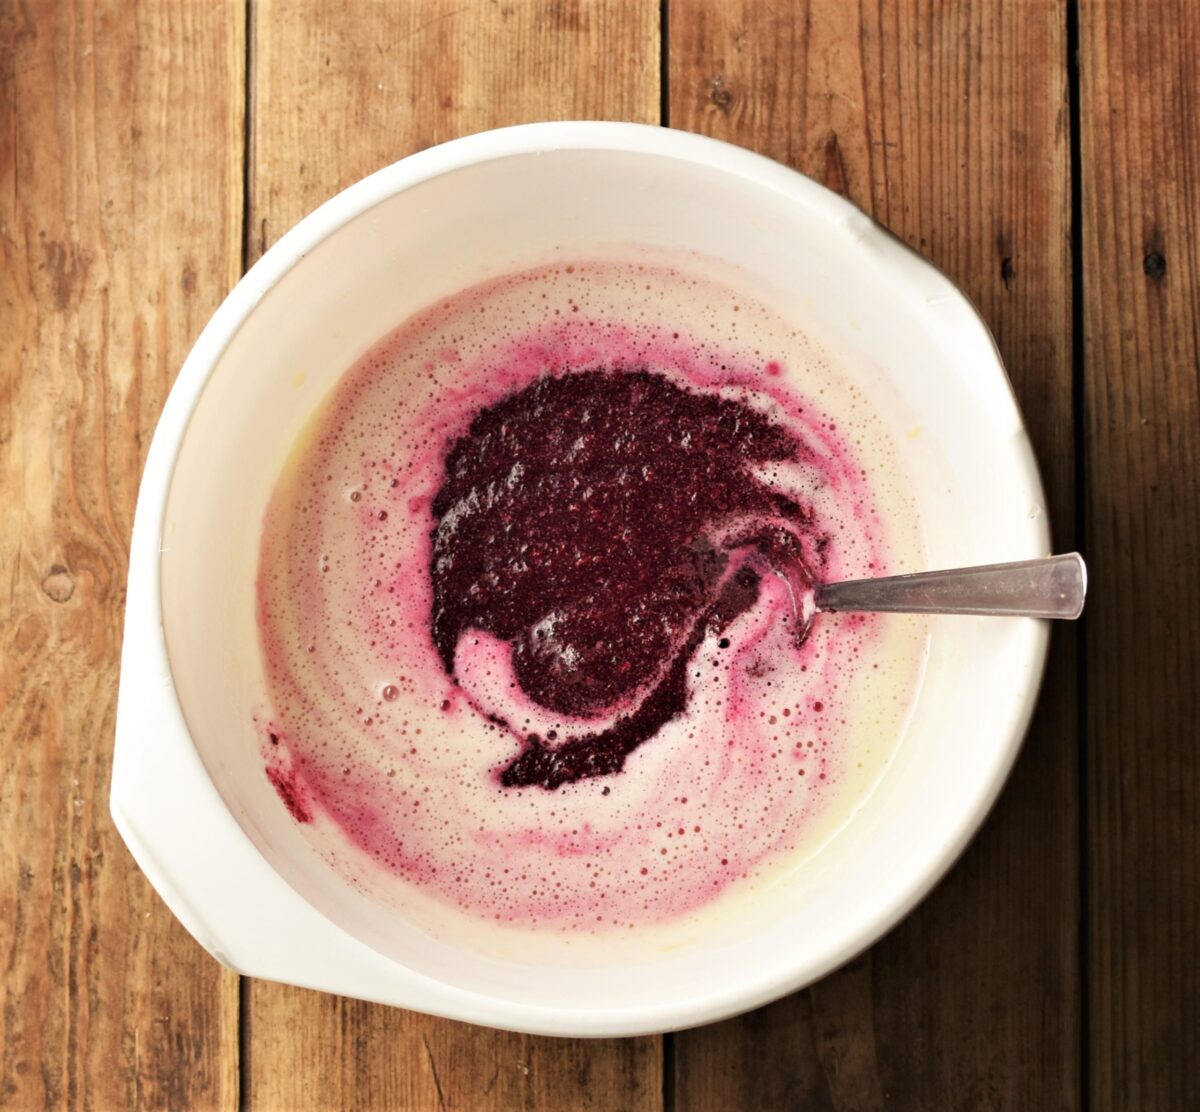 Creamy egg mixture and beet puree in large white bowl with spoon.